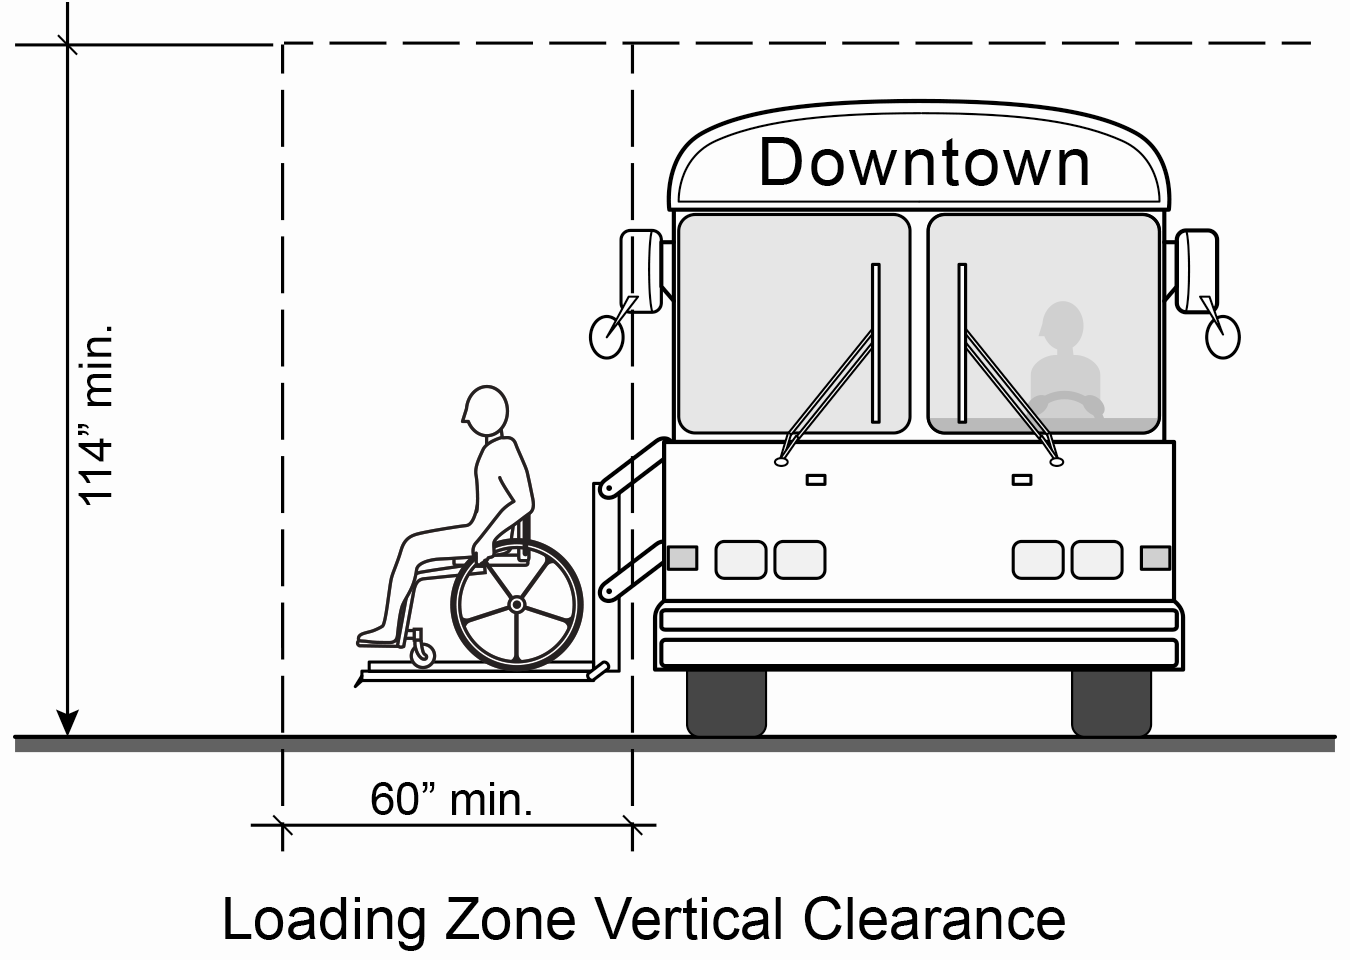 Figure 9: Bus stopped at loading zone with lift extended carrying individual in a wheelchair.